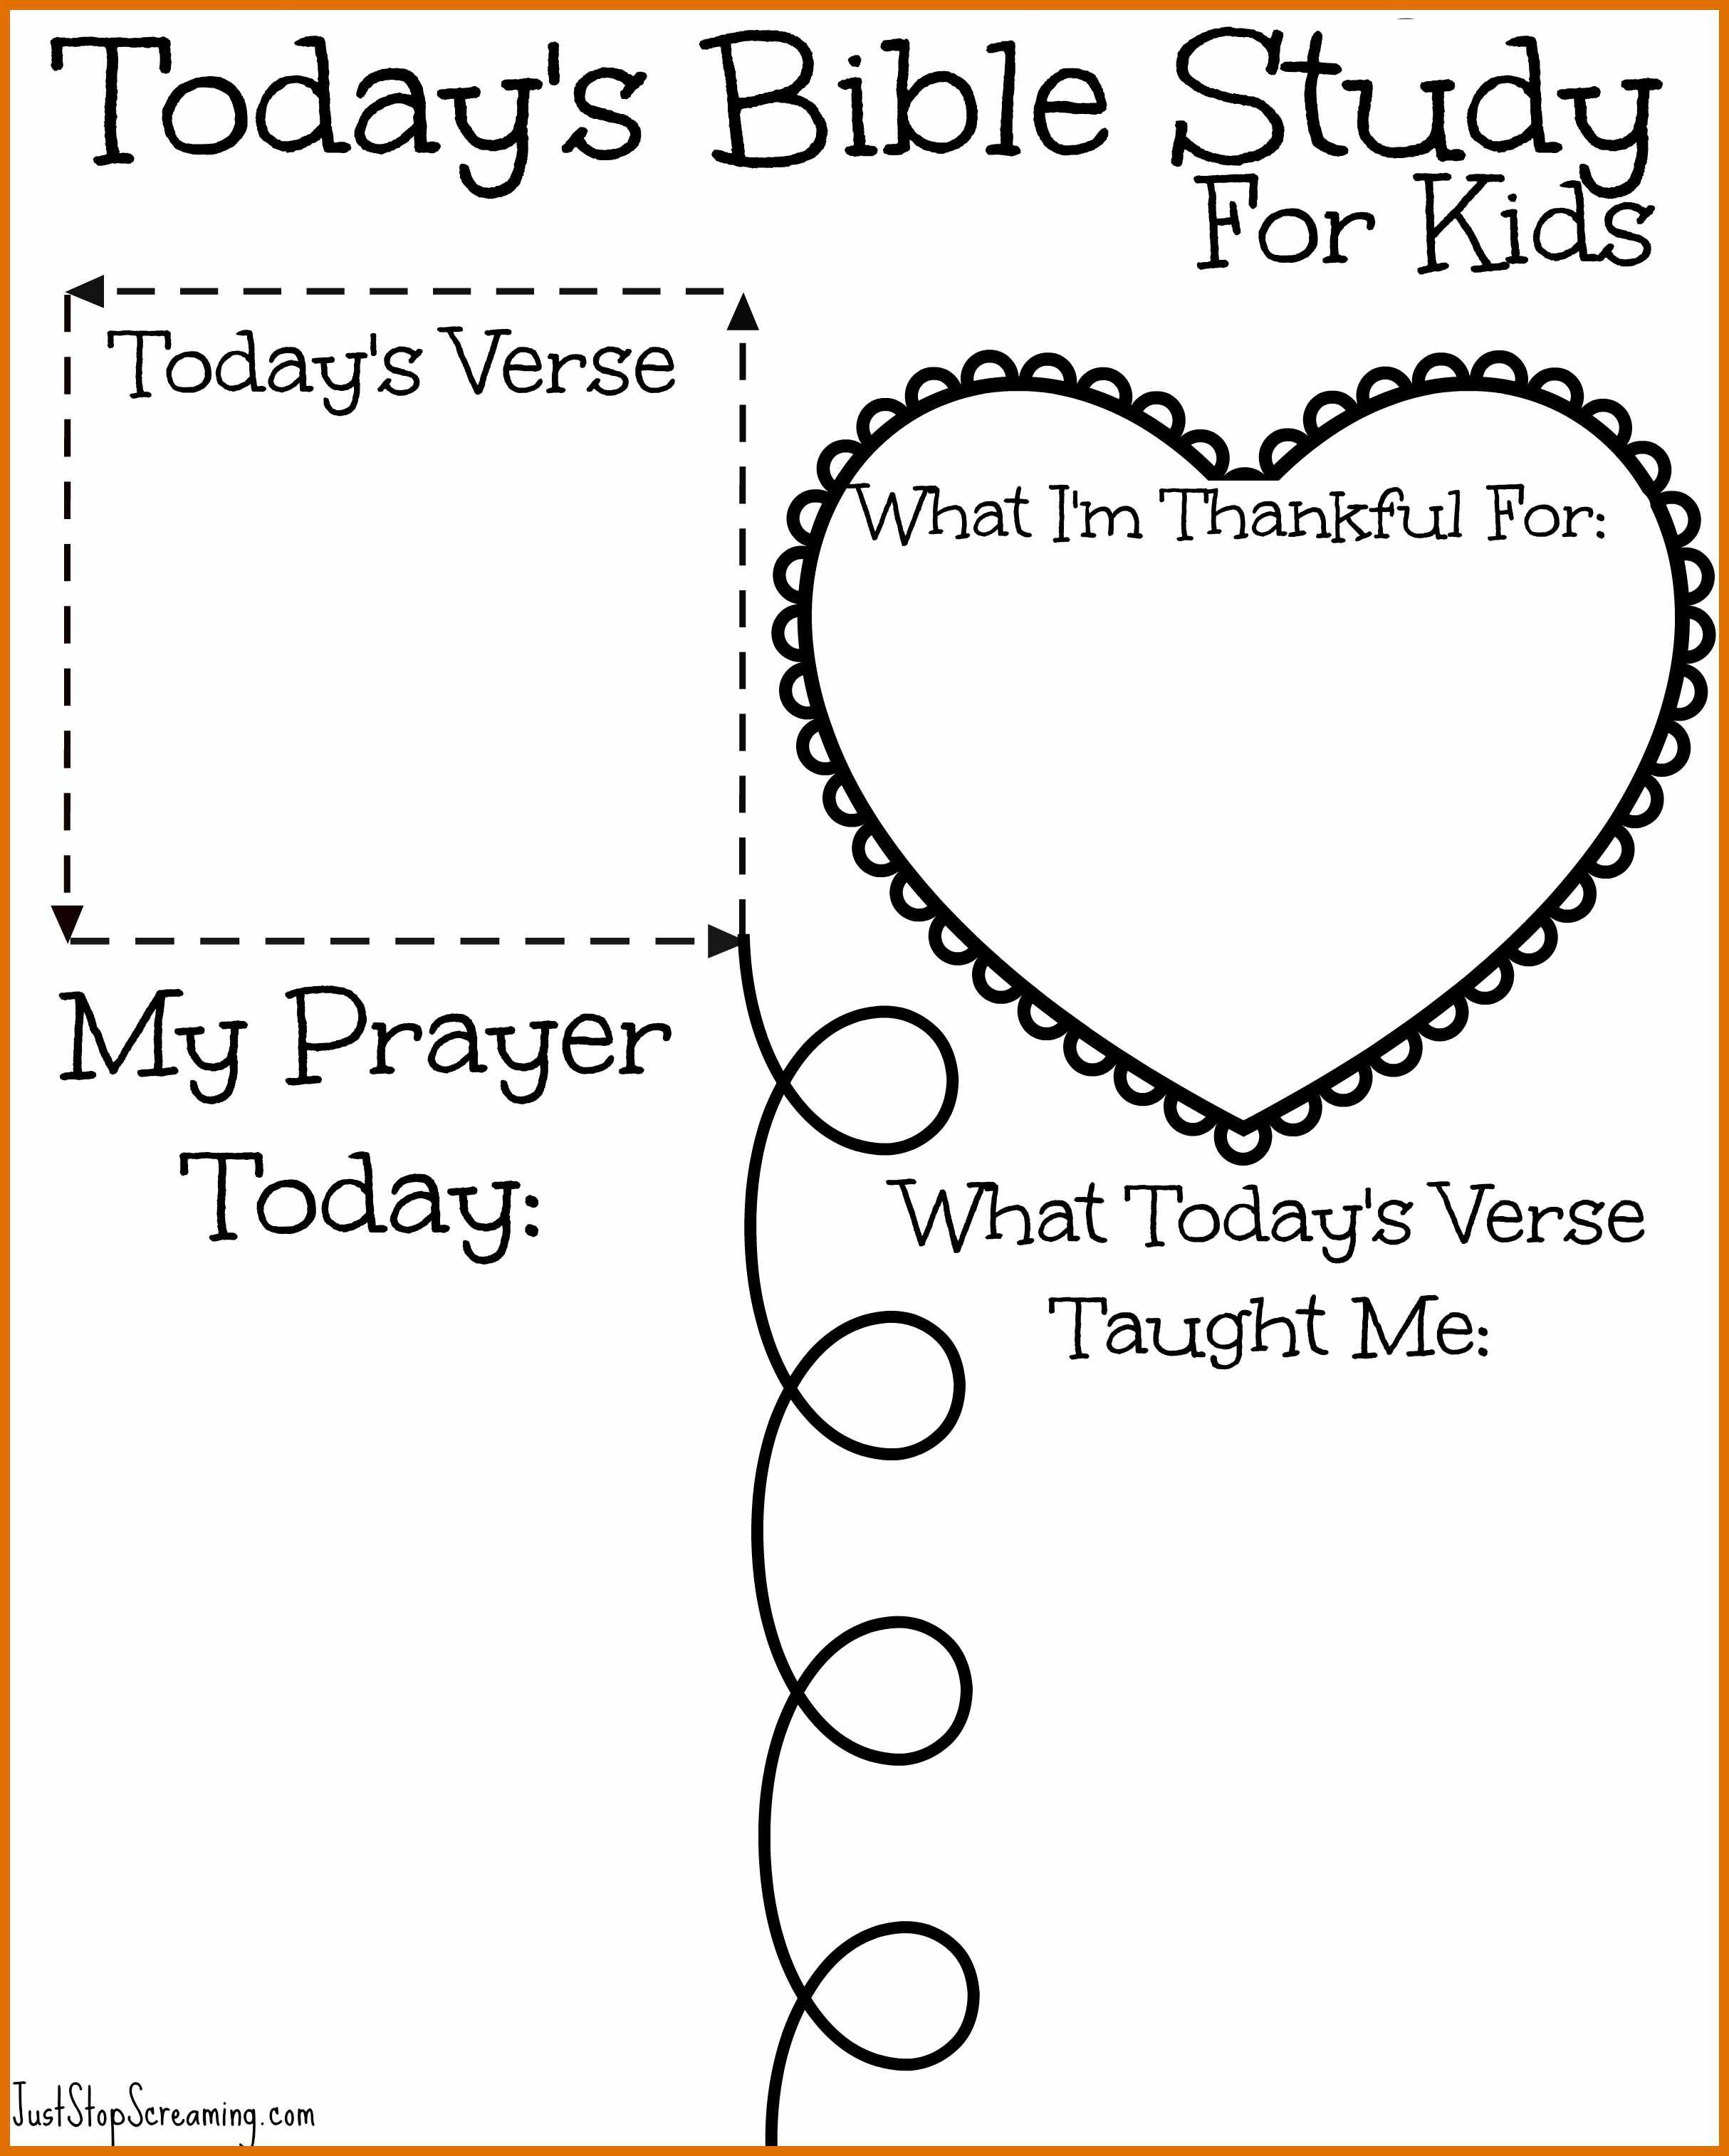 8-9 Free Printable Bible Study Worksheets | Sowtemplate - Free Printable Children&amp;#039;s Bible Lessons